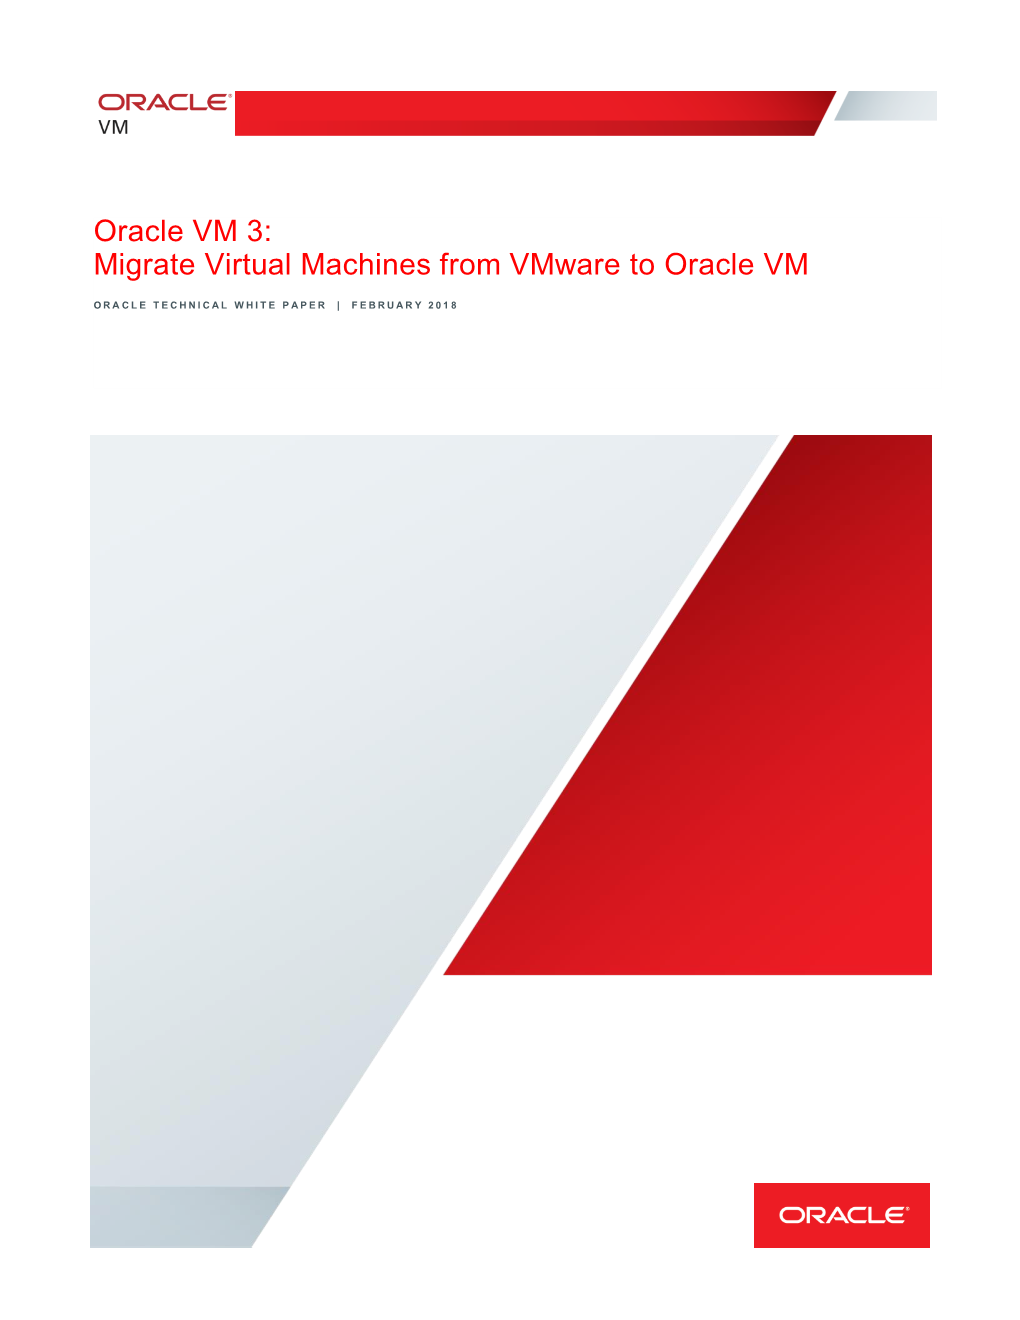 Migrate Virtual Machines from Vmware to Oracle VM